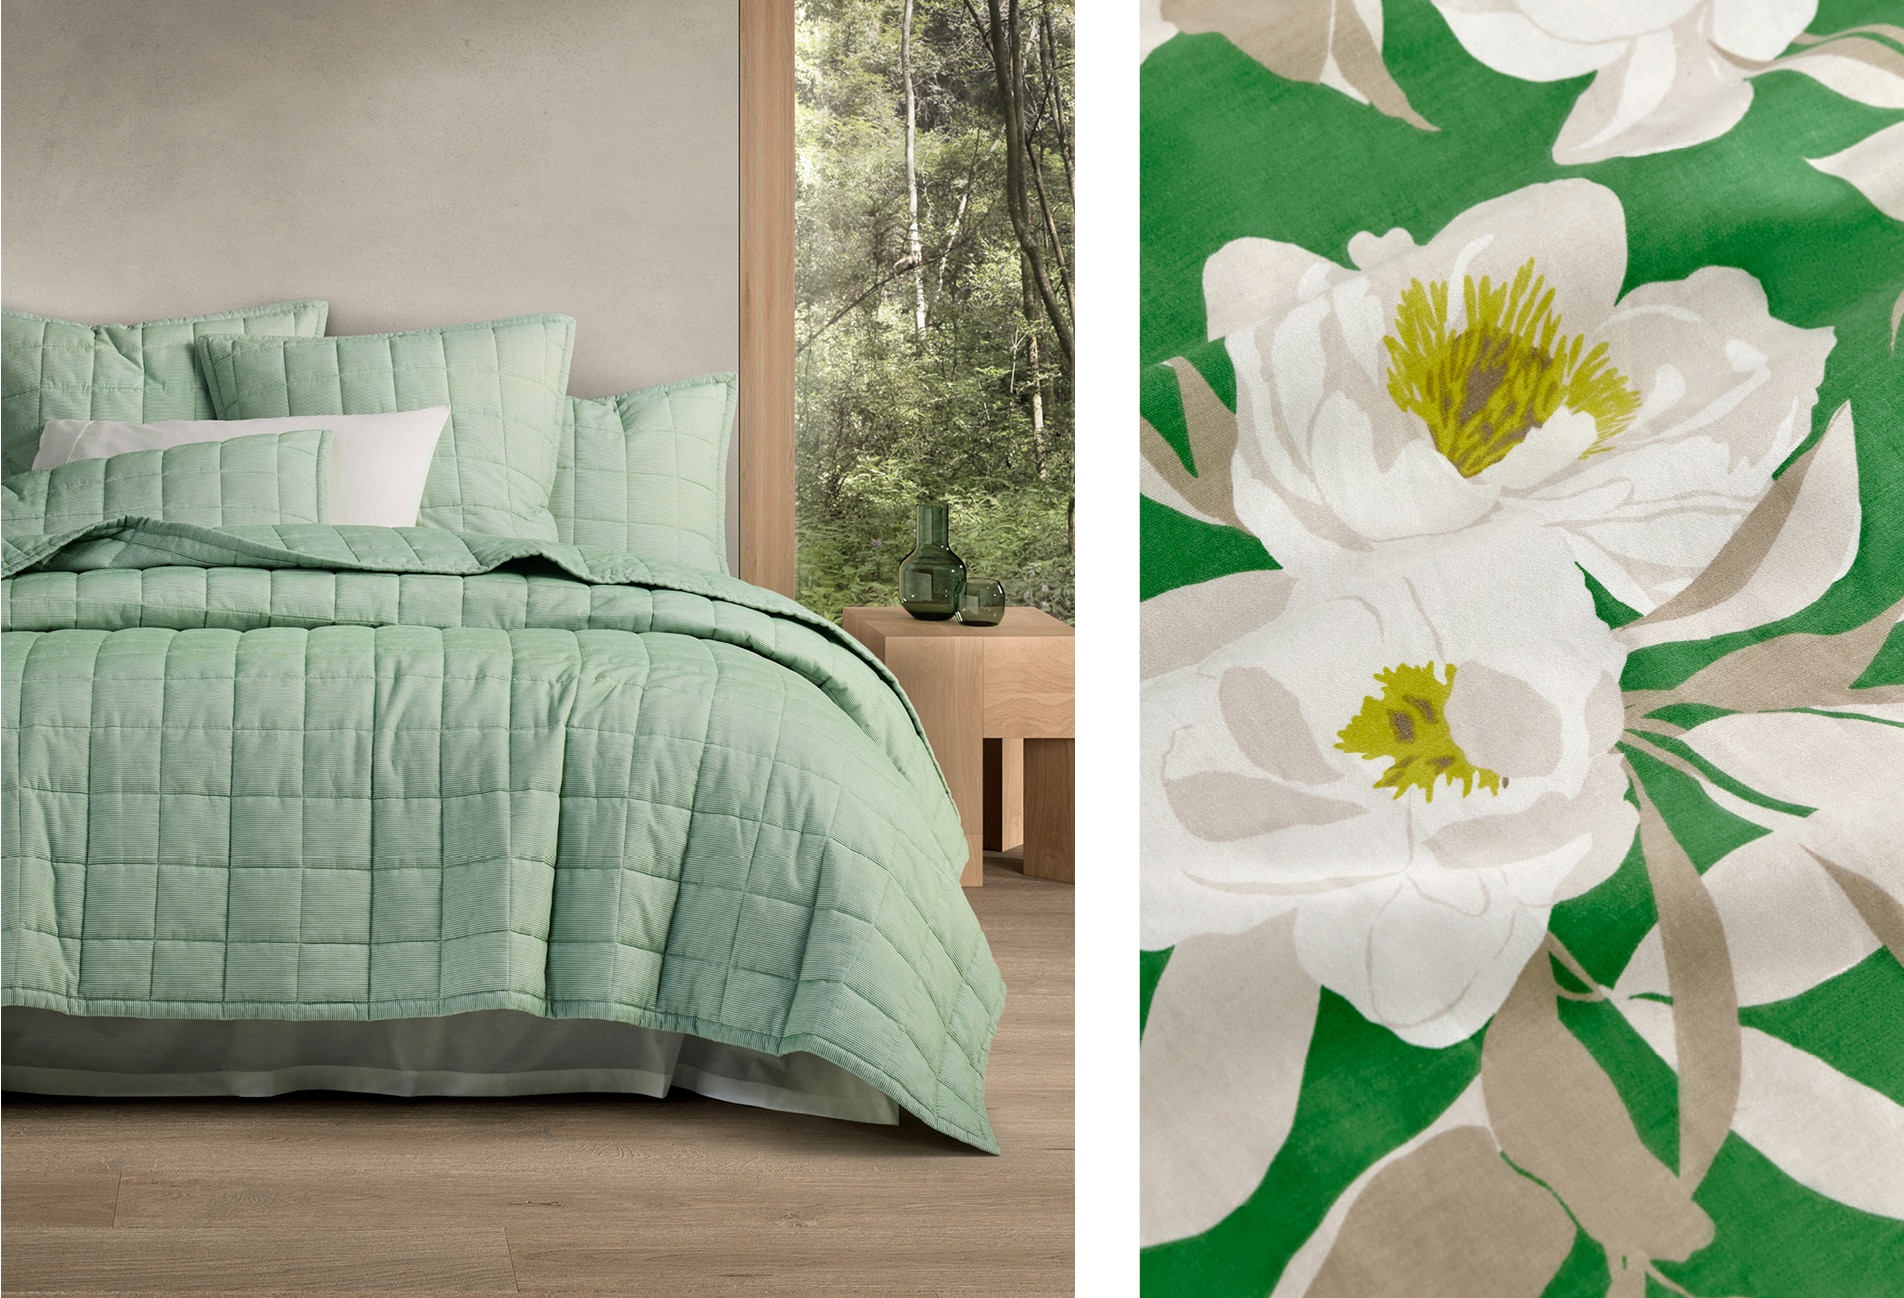 split image. left side, bed with quilted bed cover & pillowcases with green/white stripes. wooden elements, grey wall, window shows bush outdoors. right side: close up of maplewood quilt cover, greenbackground and oversize peony pattern in cream.